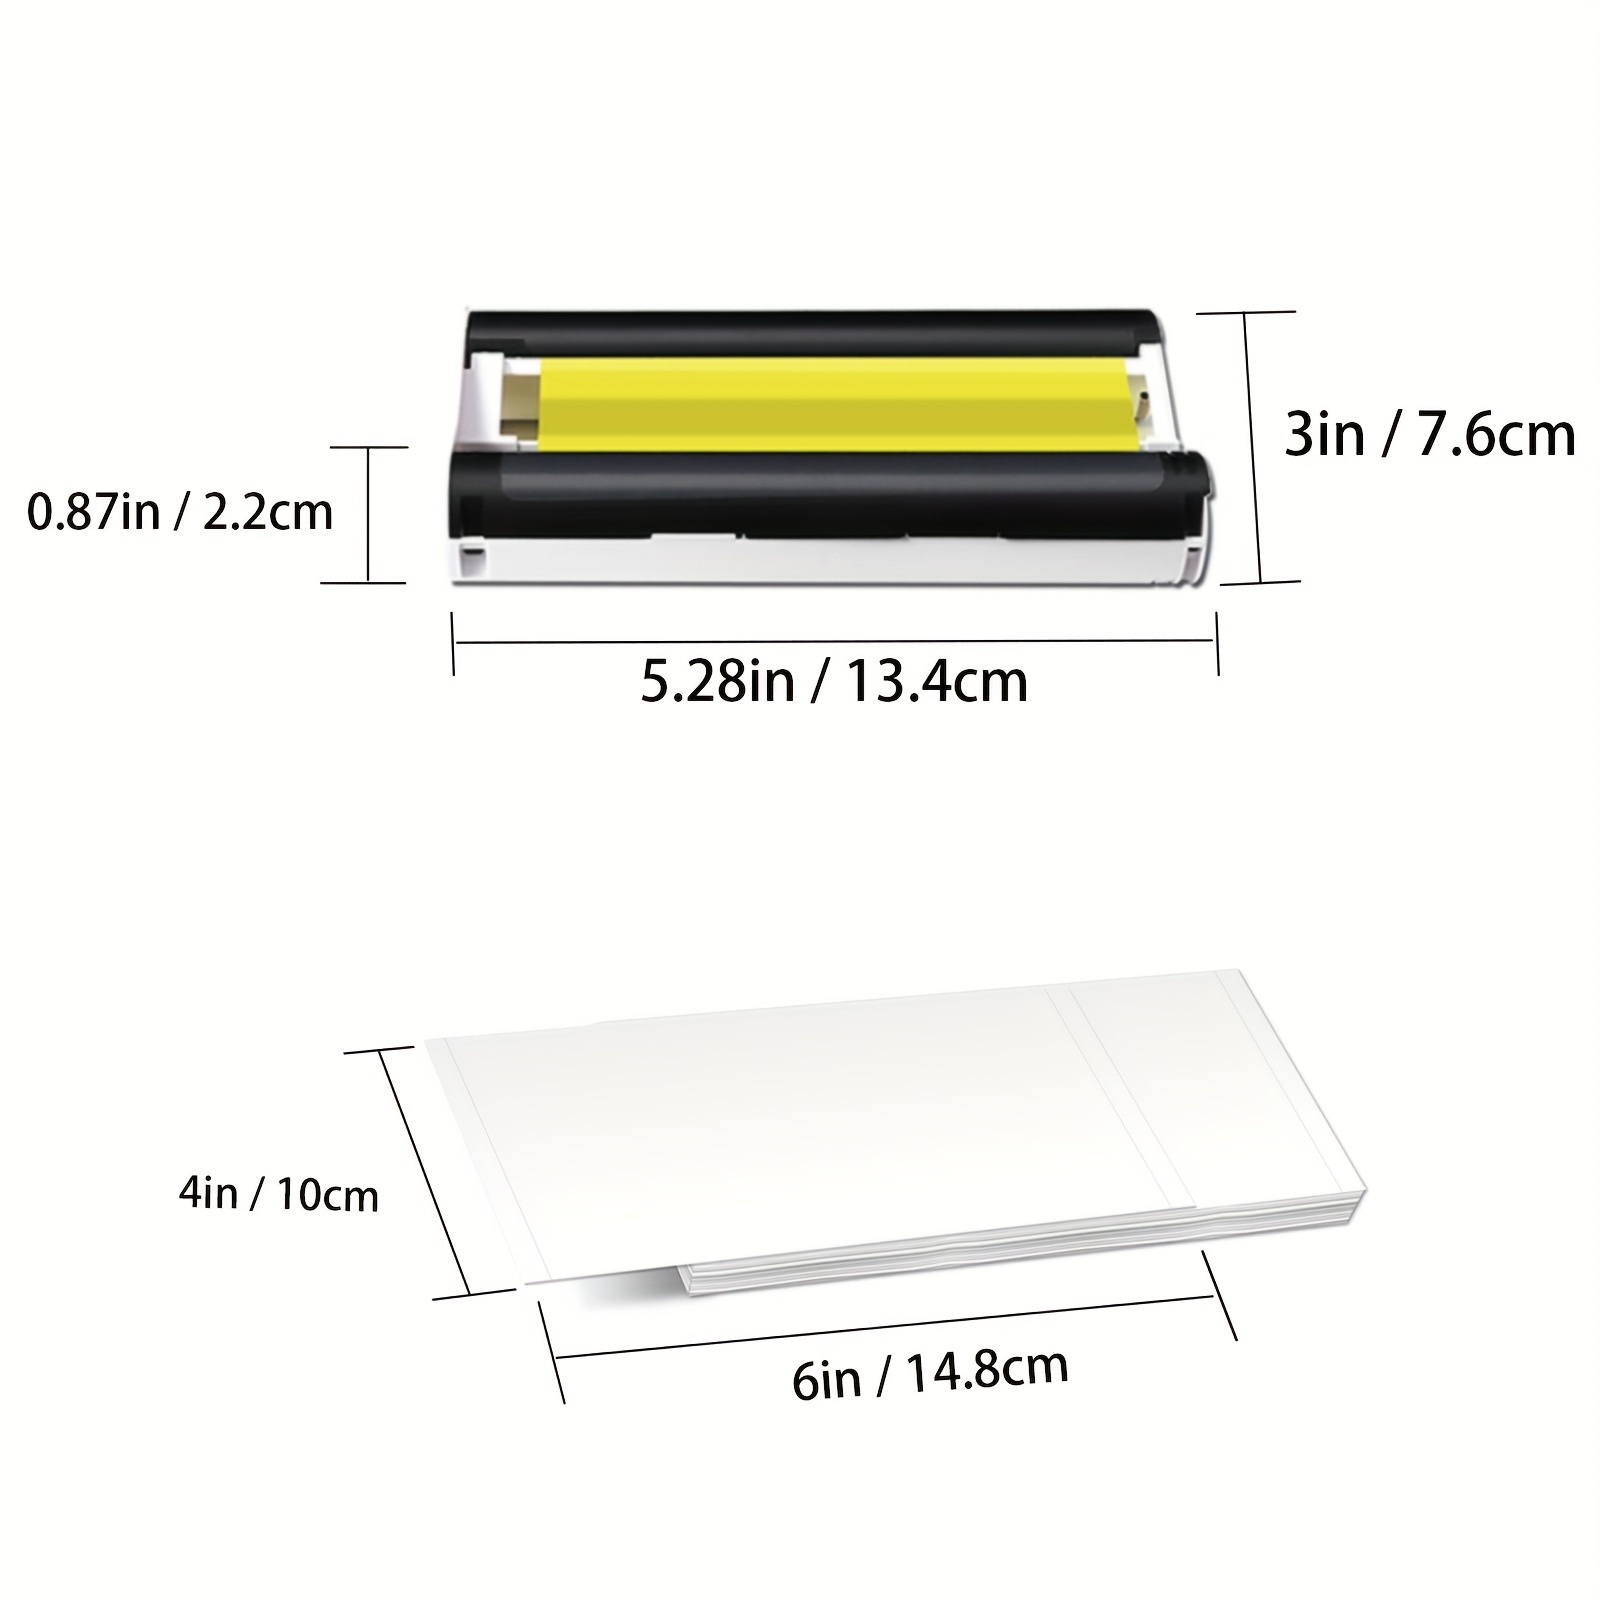  2-Pack Compatible Selphy CP1300 Ink and Paper Replace for  Canon CP1500 CP1300 CP1200 CP1000 CP910, CP900, CP800 Photo Printer Paper  Glossy, KP-108IN 216 Sheets and 6 Color Ink Cartridges Cassette 